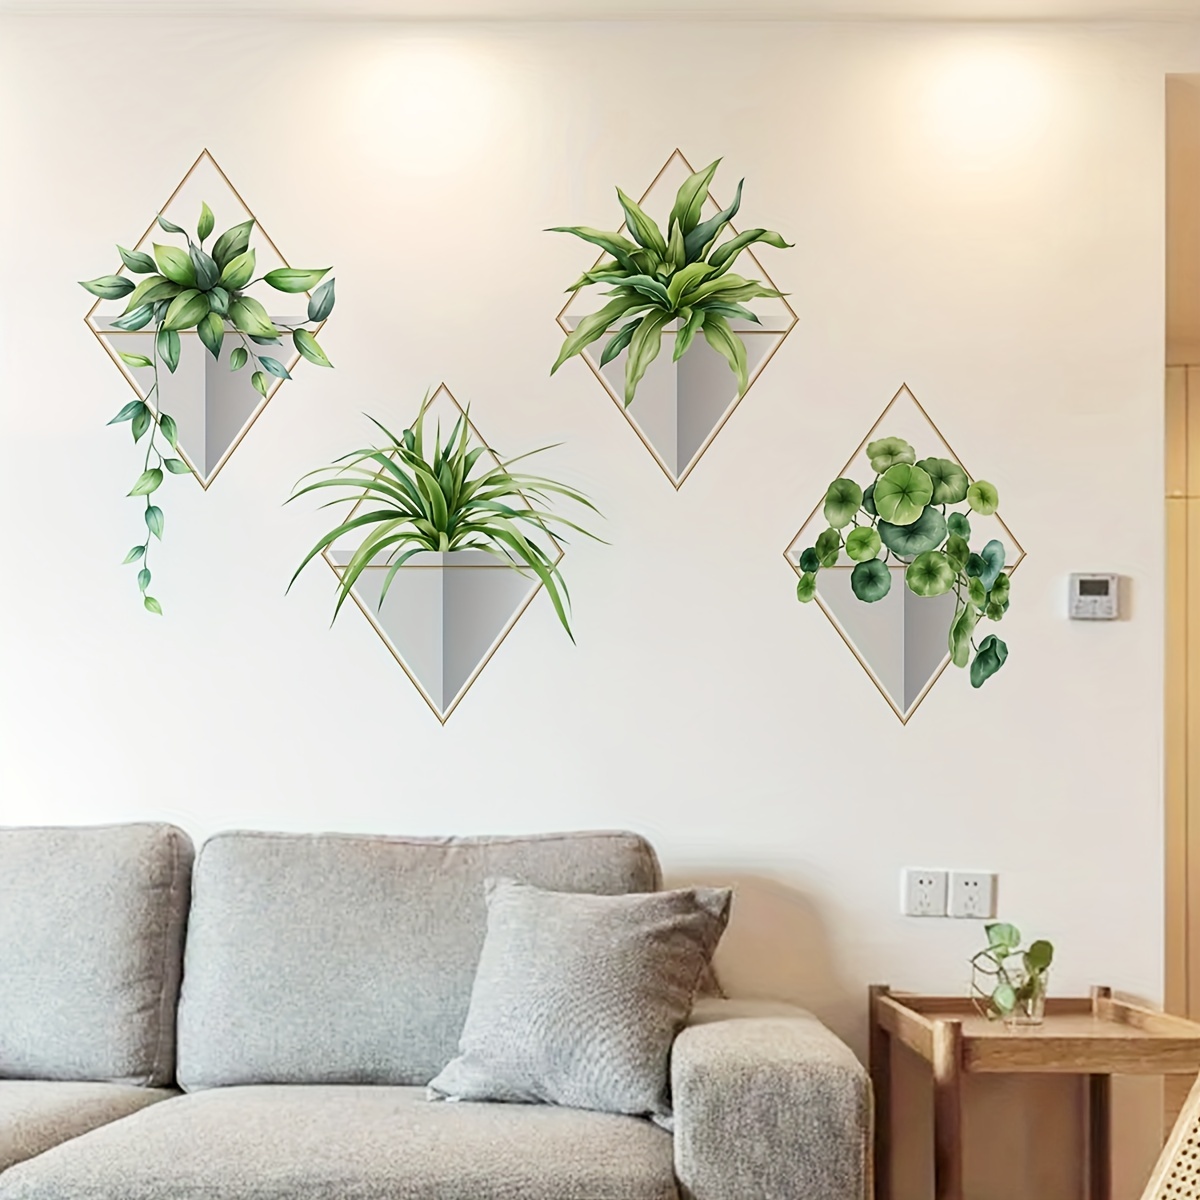 Hanging Geometric Plant Wall Decals Succulent Pot Wall Stickers Removable  Art Murals for Bedroom Living Room Offices Classroom Decoration